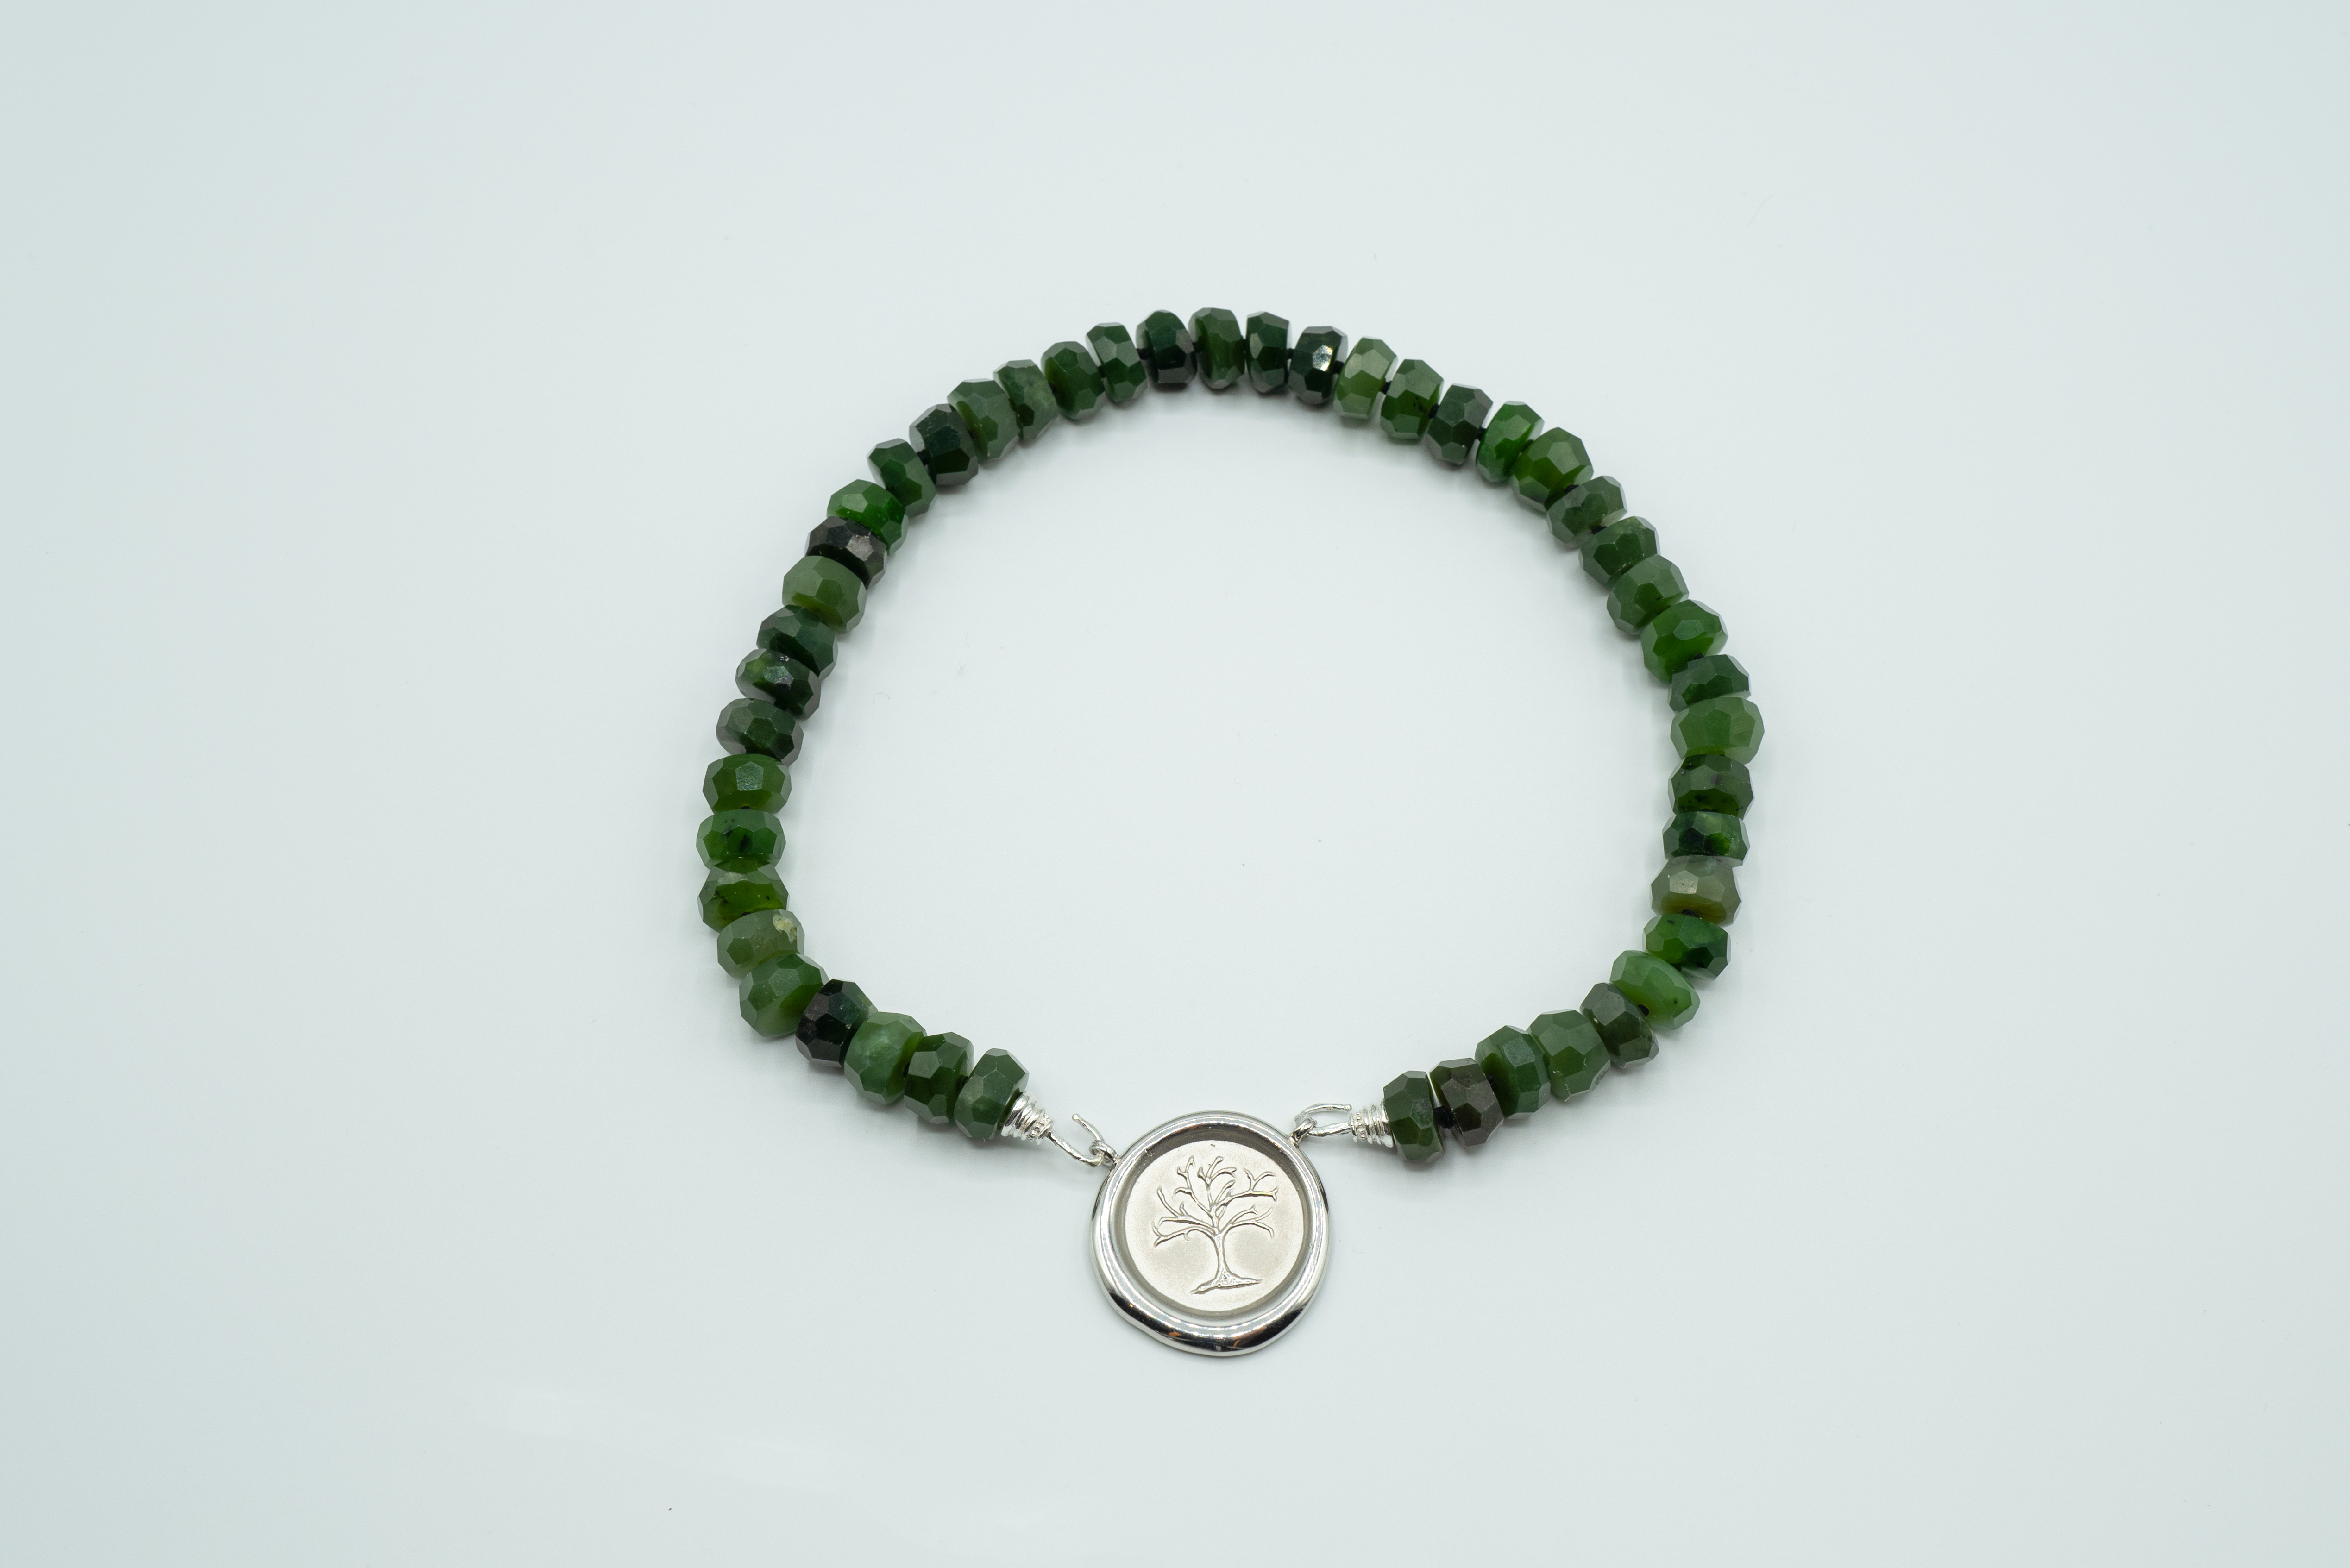 Canadian Jade Rough Rondele Faceted 12-13mm with Sterling Hooks